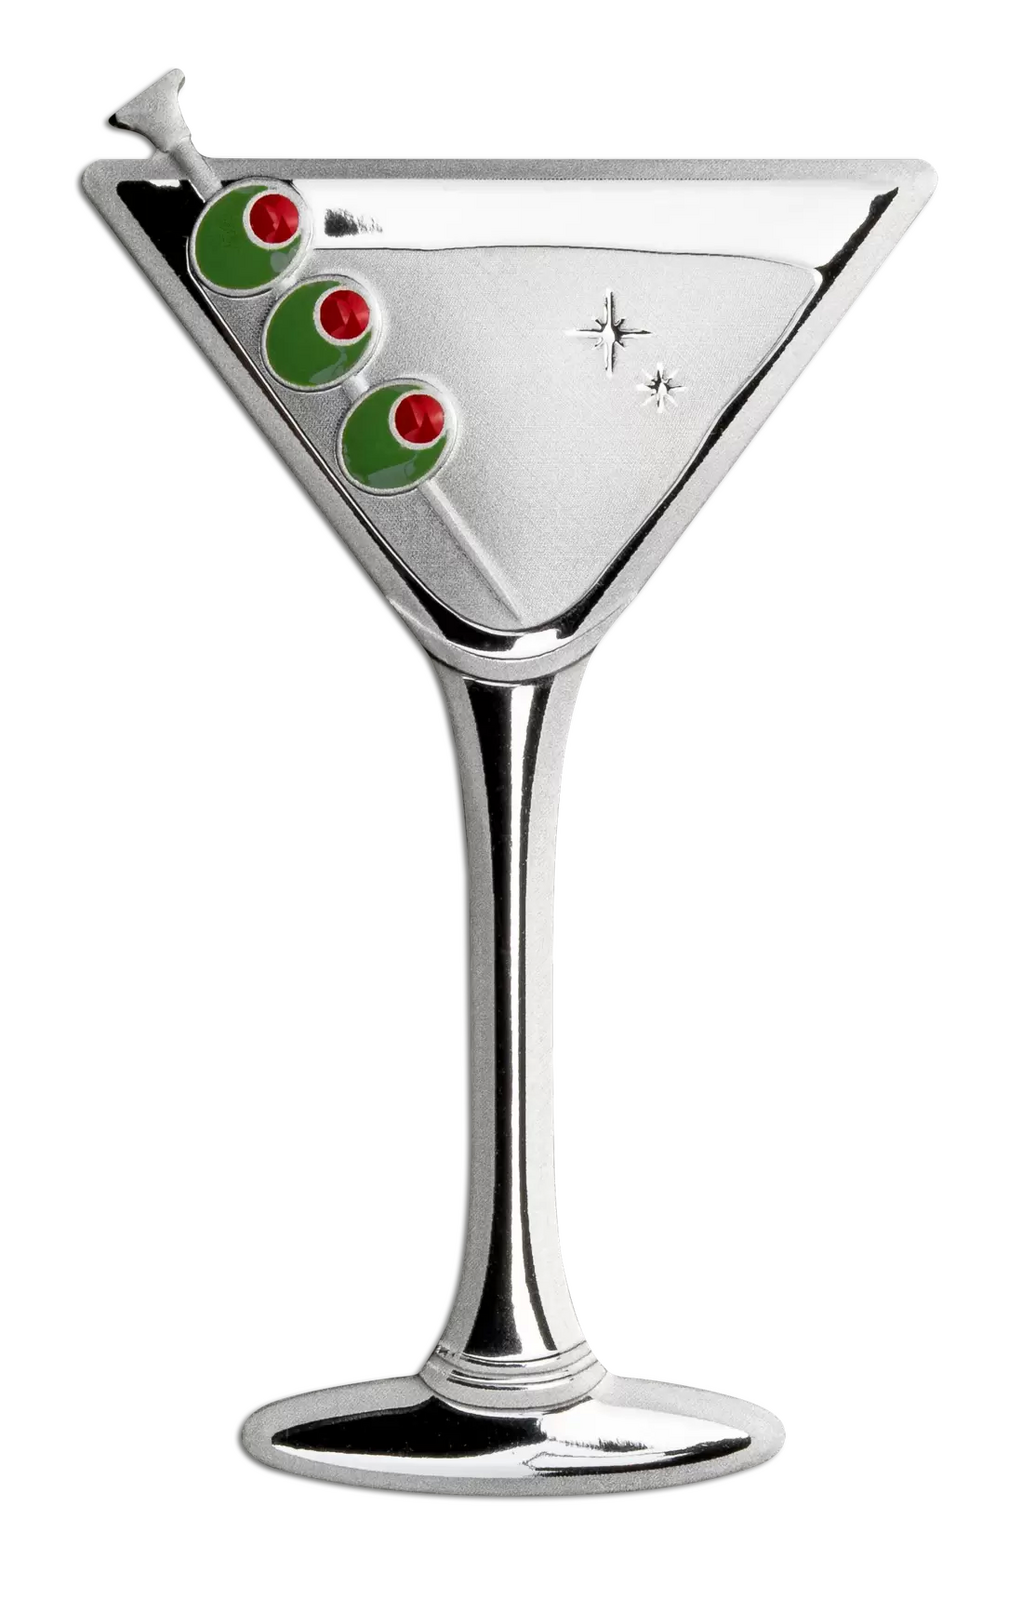 2023 $1 Martini 10g Silver Prooflike Coin